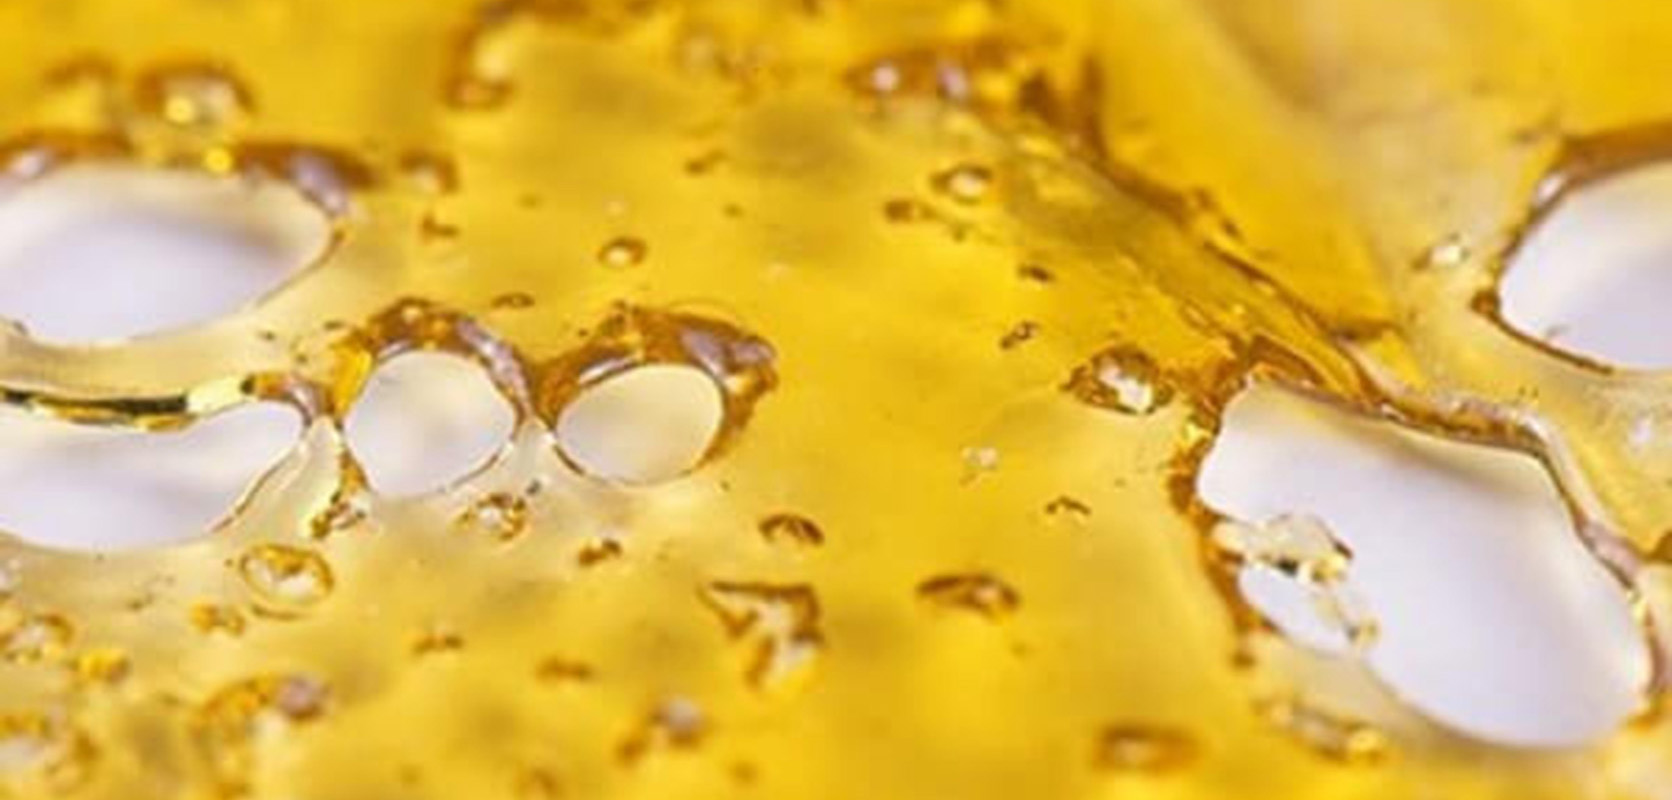 shatter weed cannabis concentrate for dabbing. dab drug THC concentrate from Low Price Bud online dispensary and mail order marijuana weed store.